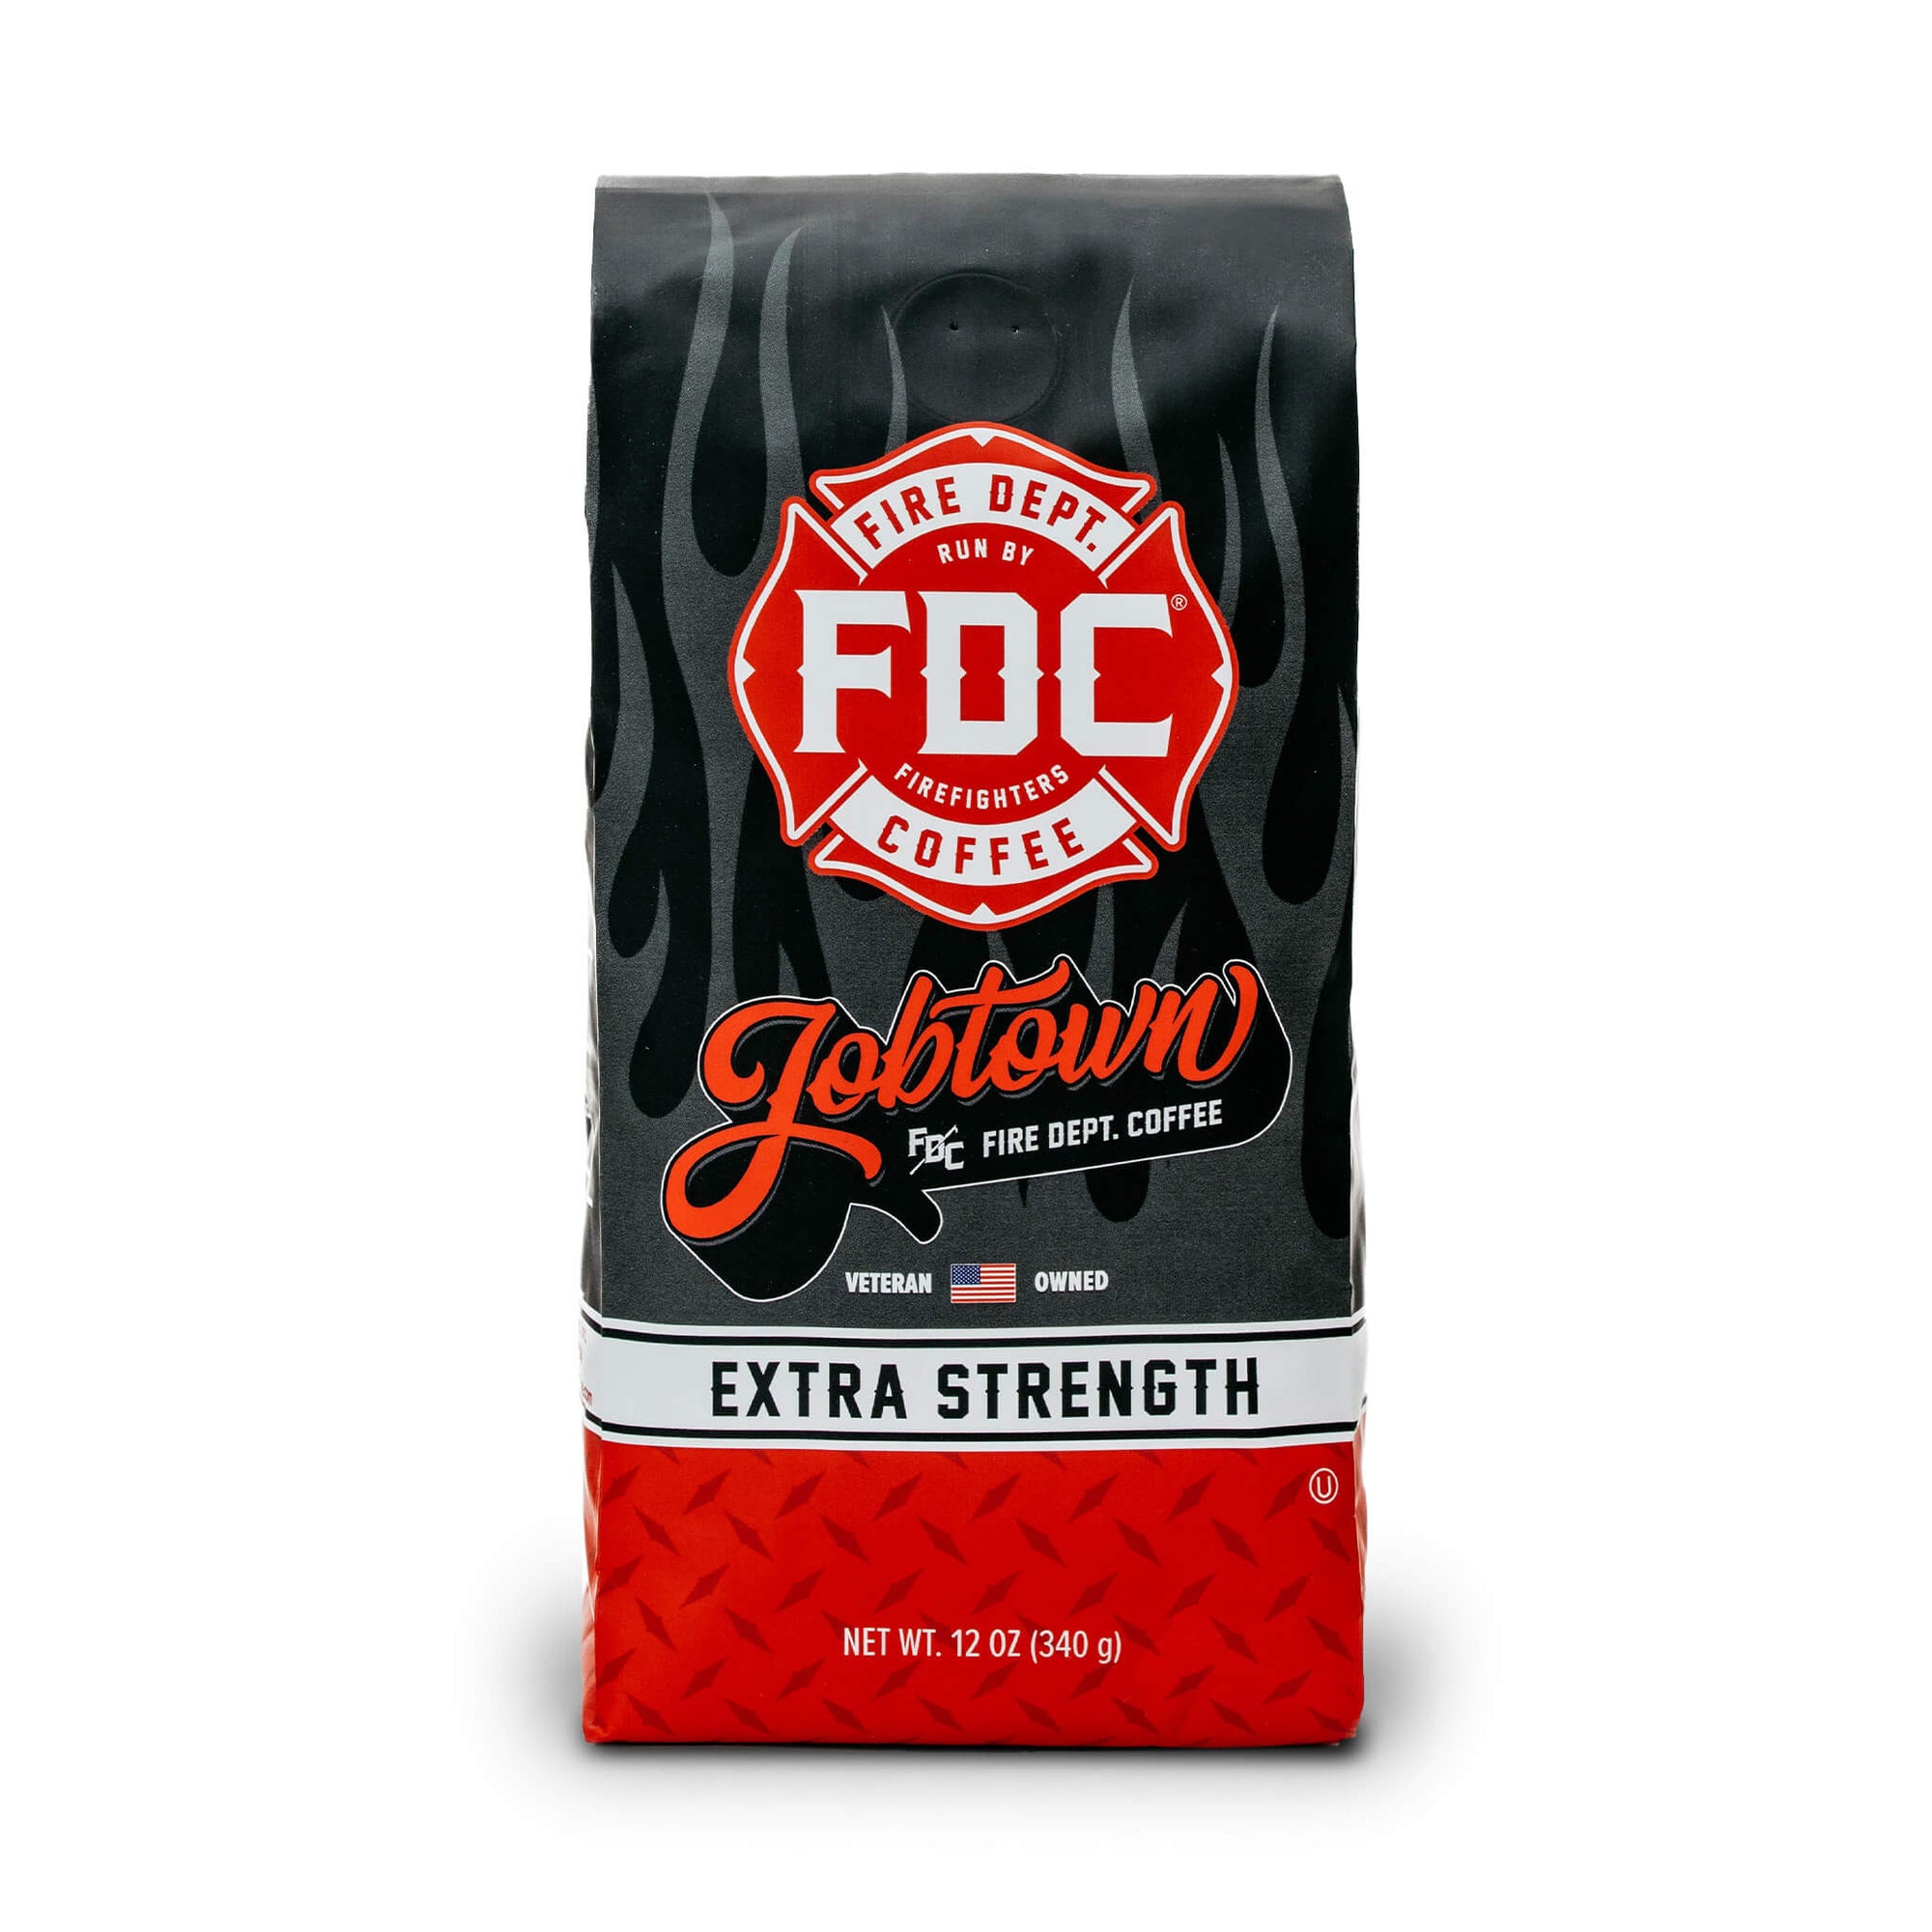 A 12 ounce bag of Fire Department Coffee's Jobtown Extra Strength Coffee